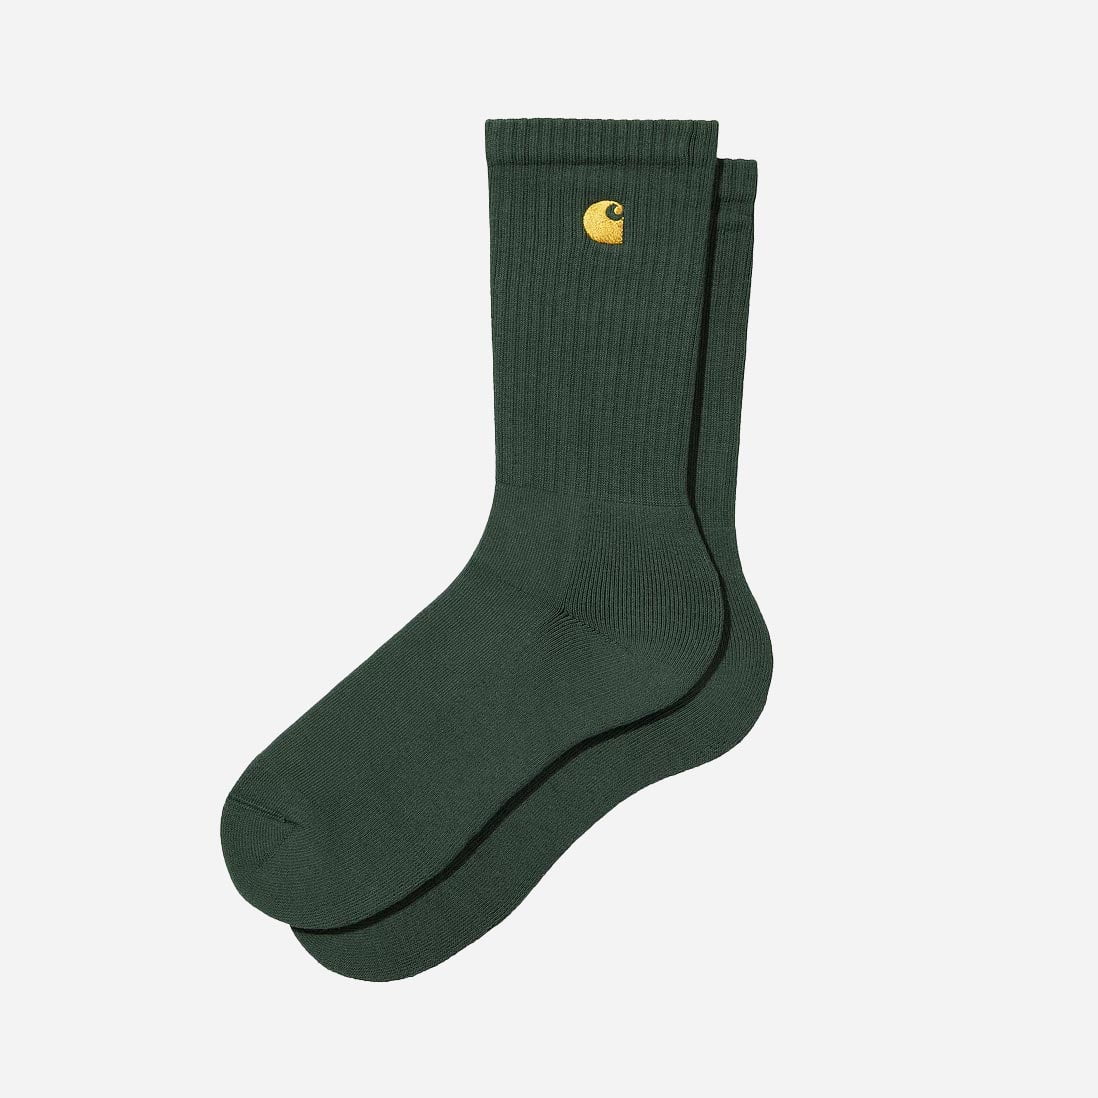 Carhartt WIP Chase Sock - Discovery Green/Gold